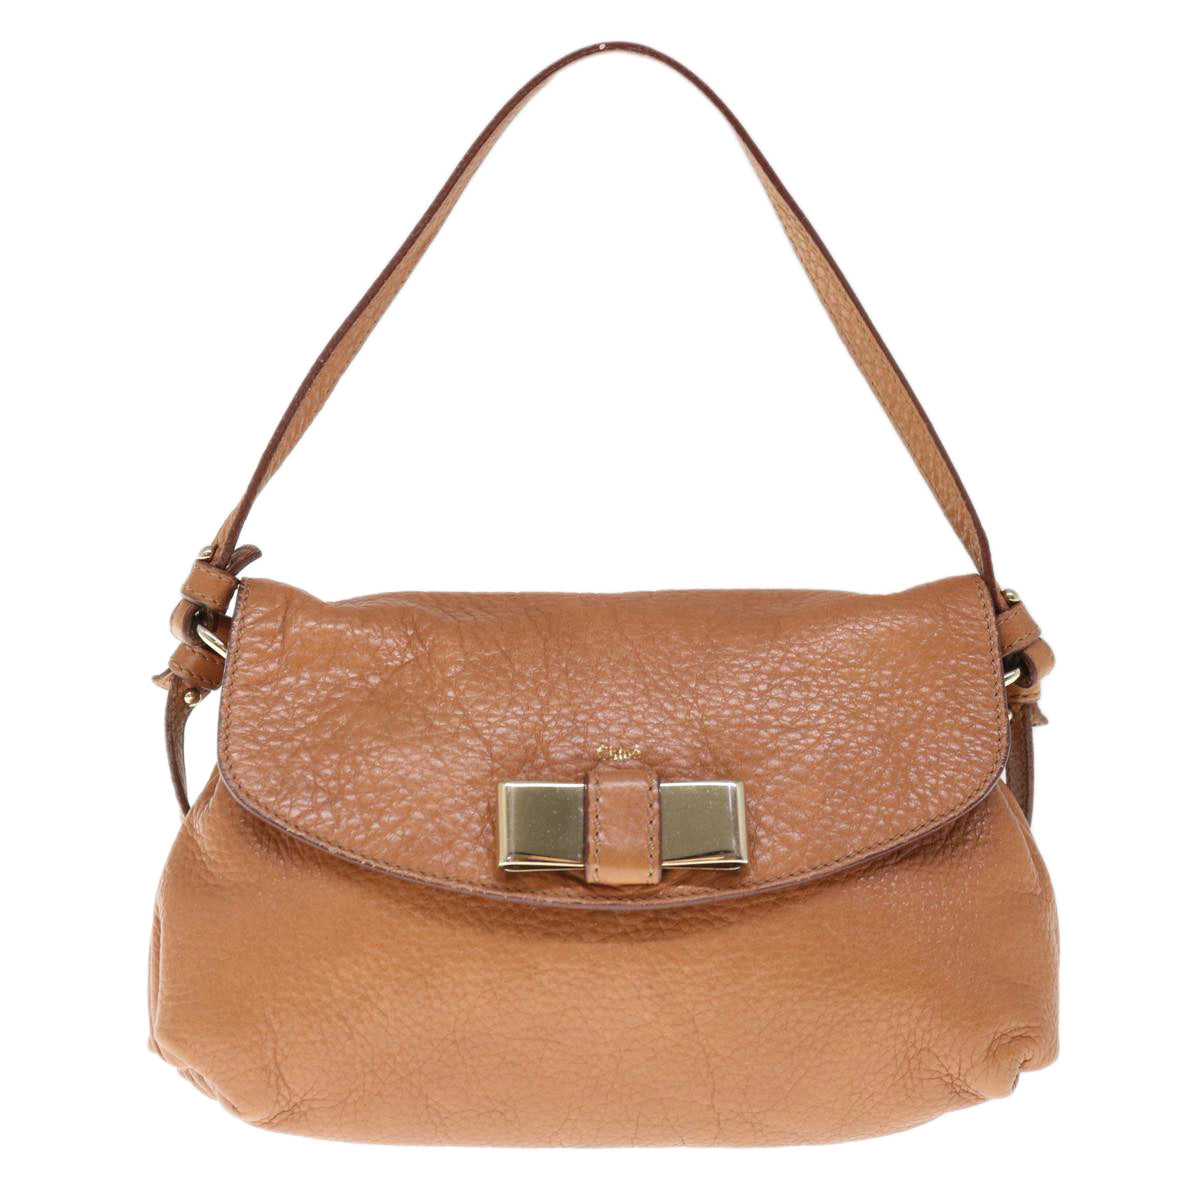 Chloe Lily Hand Bag Leather 2way Brown Auth yk10587